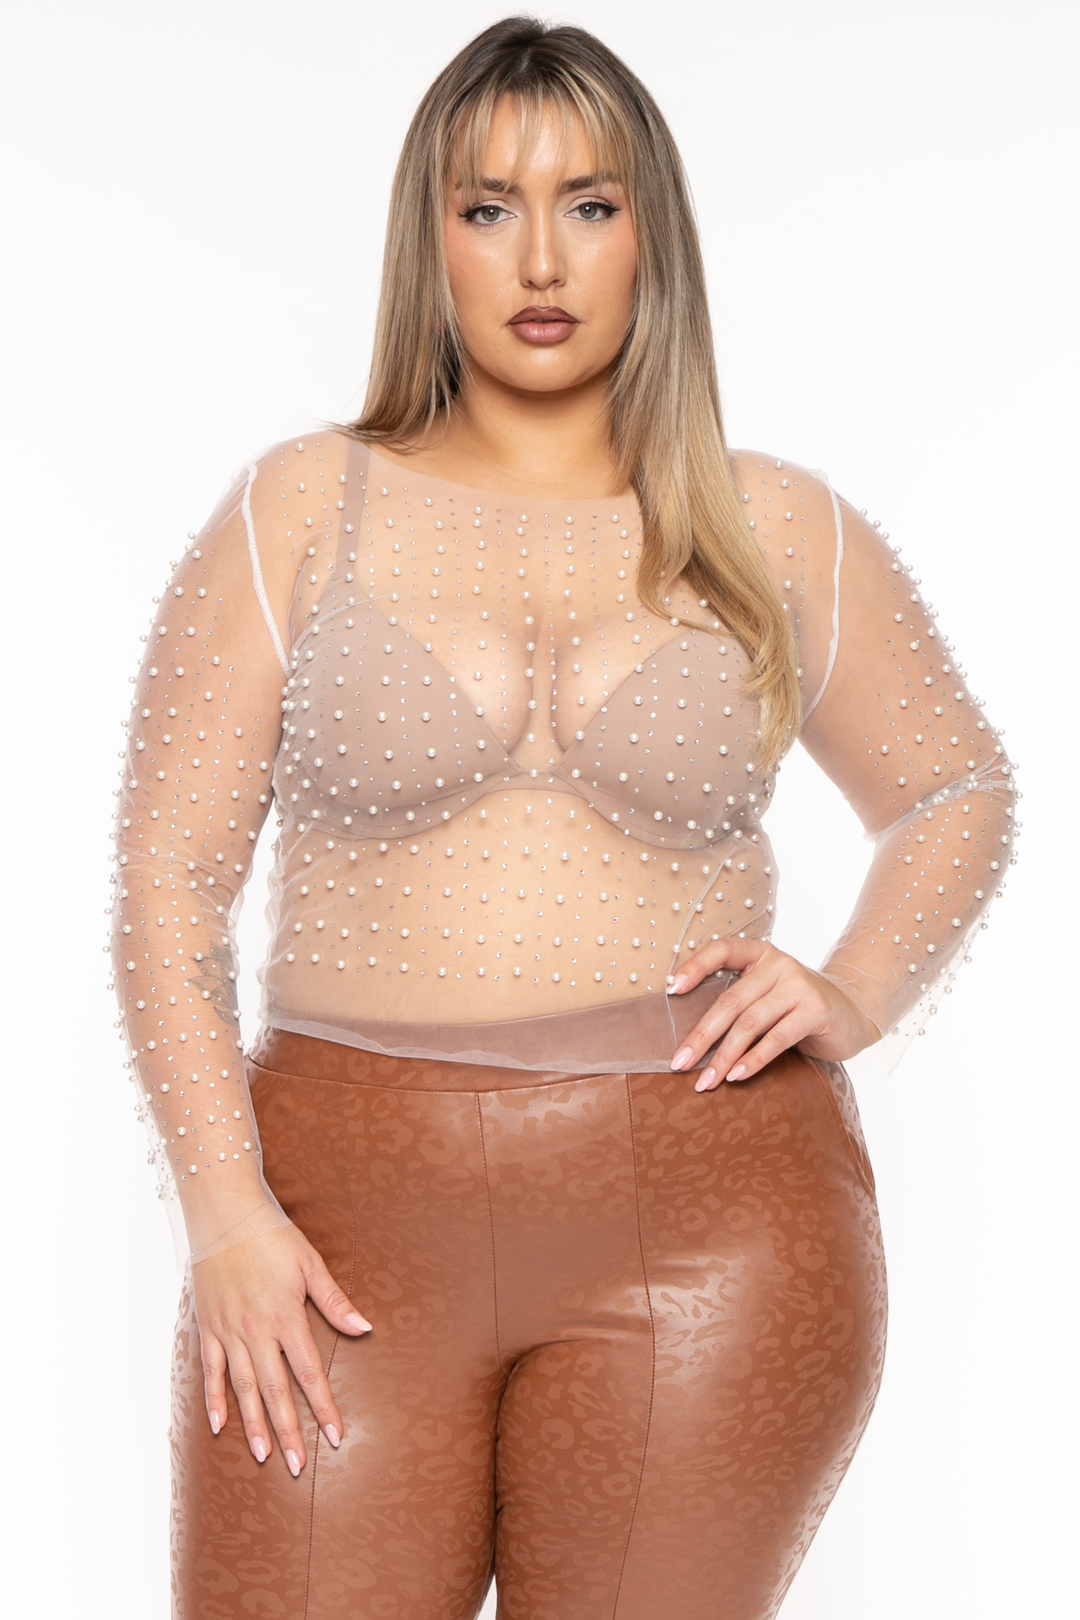 CHICCTHY TOP Tops Plus Size Sprinkle of Pearls  Top  - White